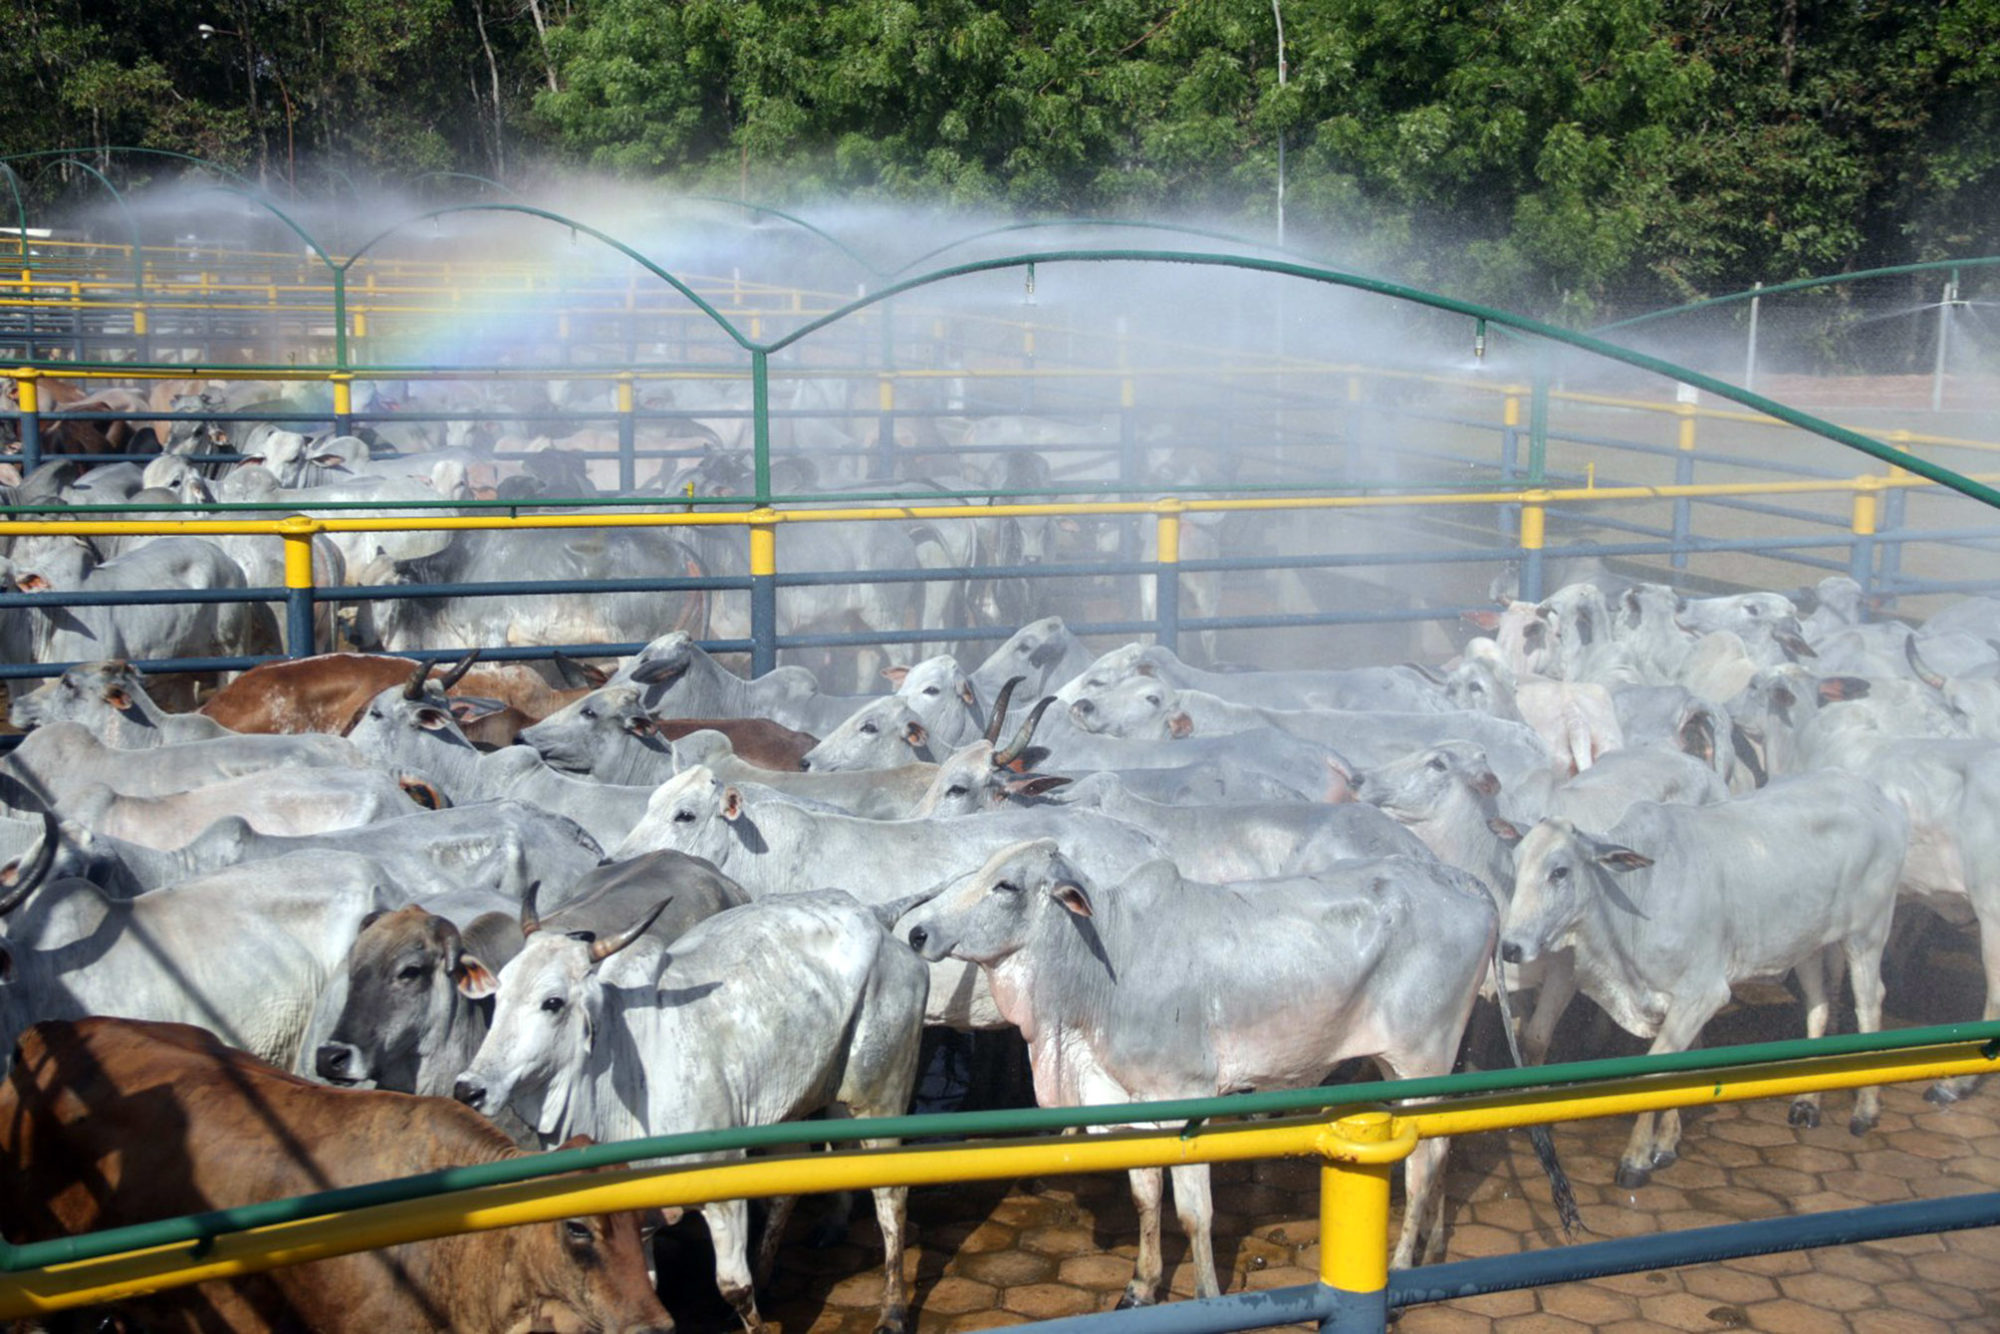 cattle farm in Xinguara in the state of Pará, Brazil